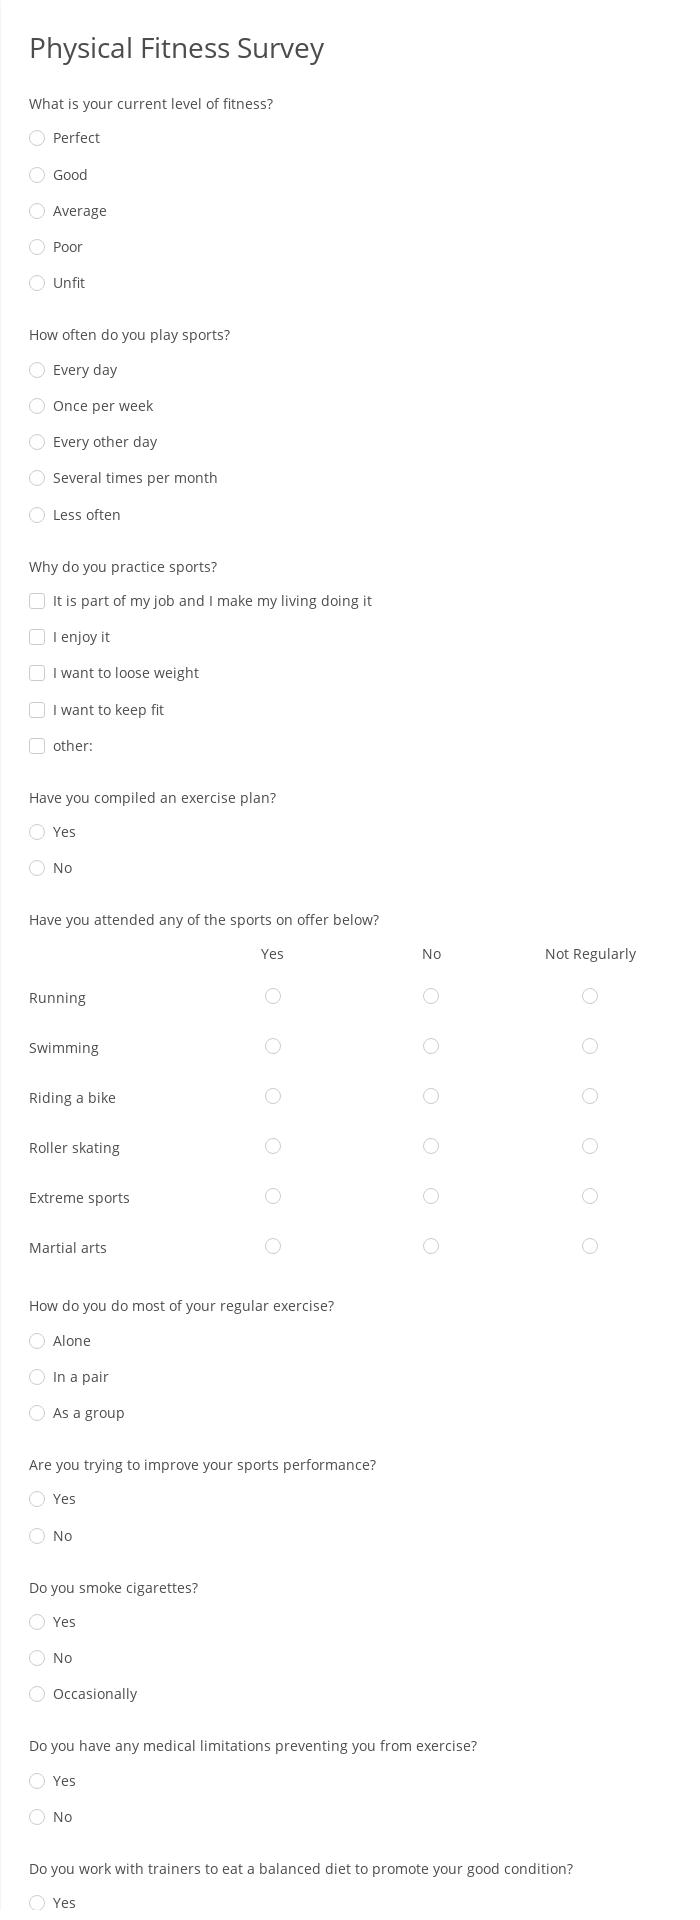 Physical Fitness Survey